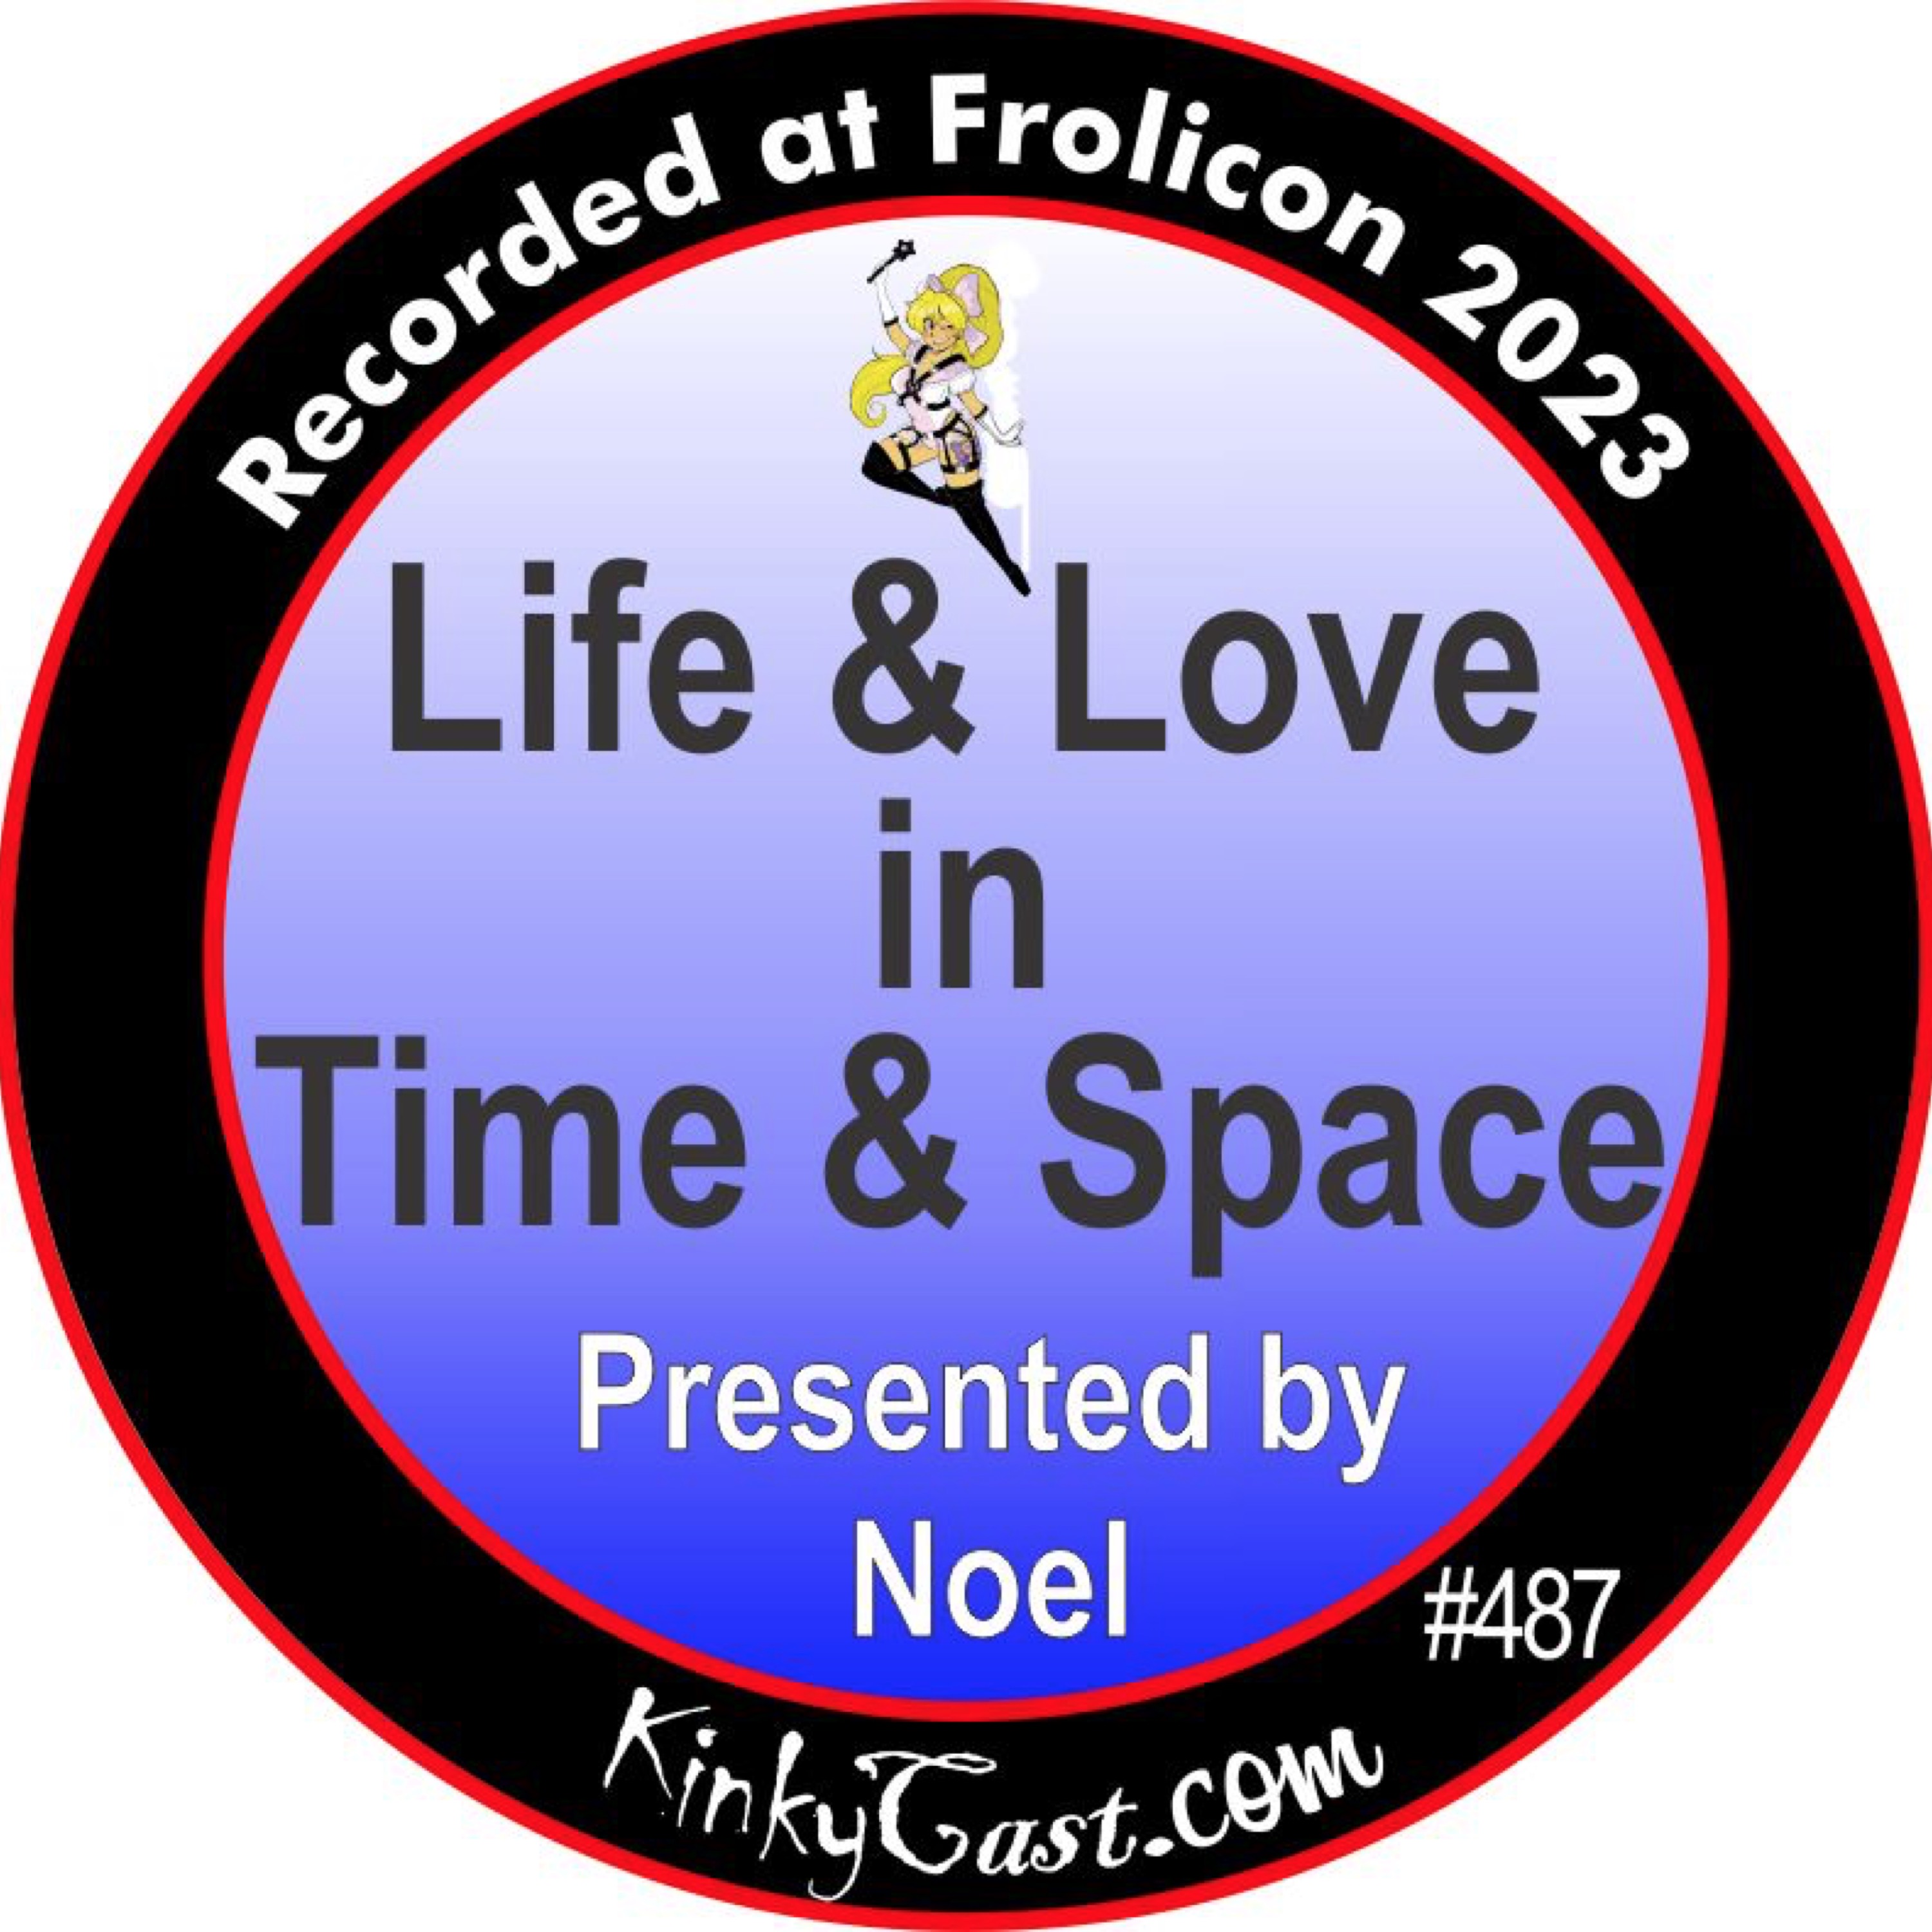 #487 - Life & Love in Time & Space